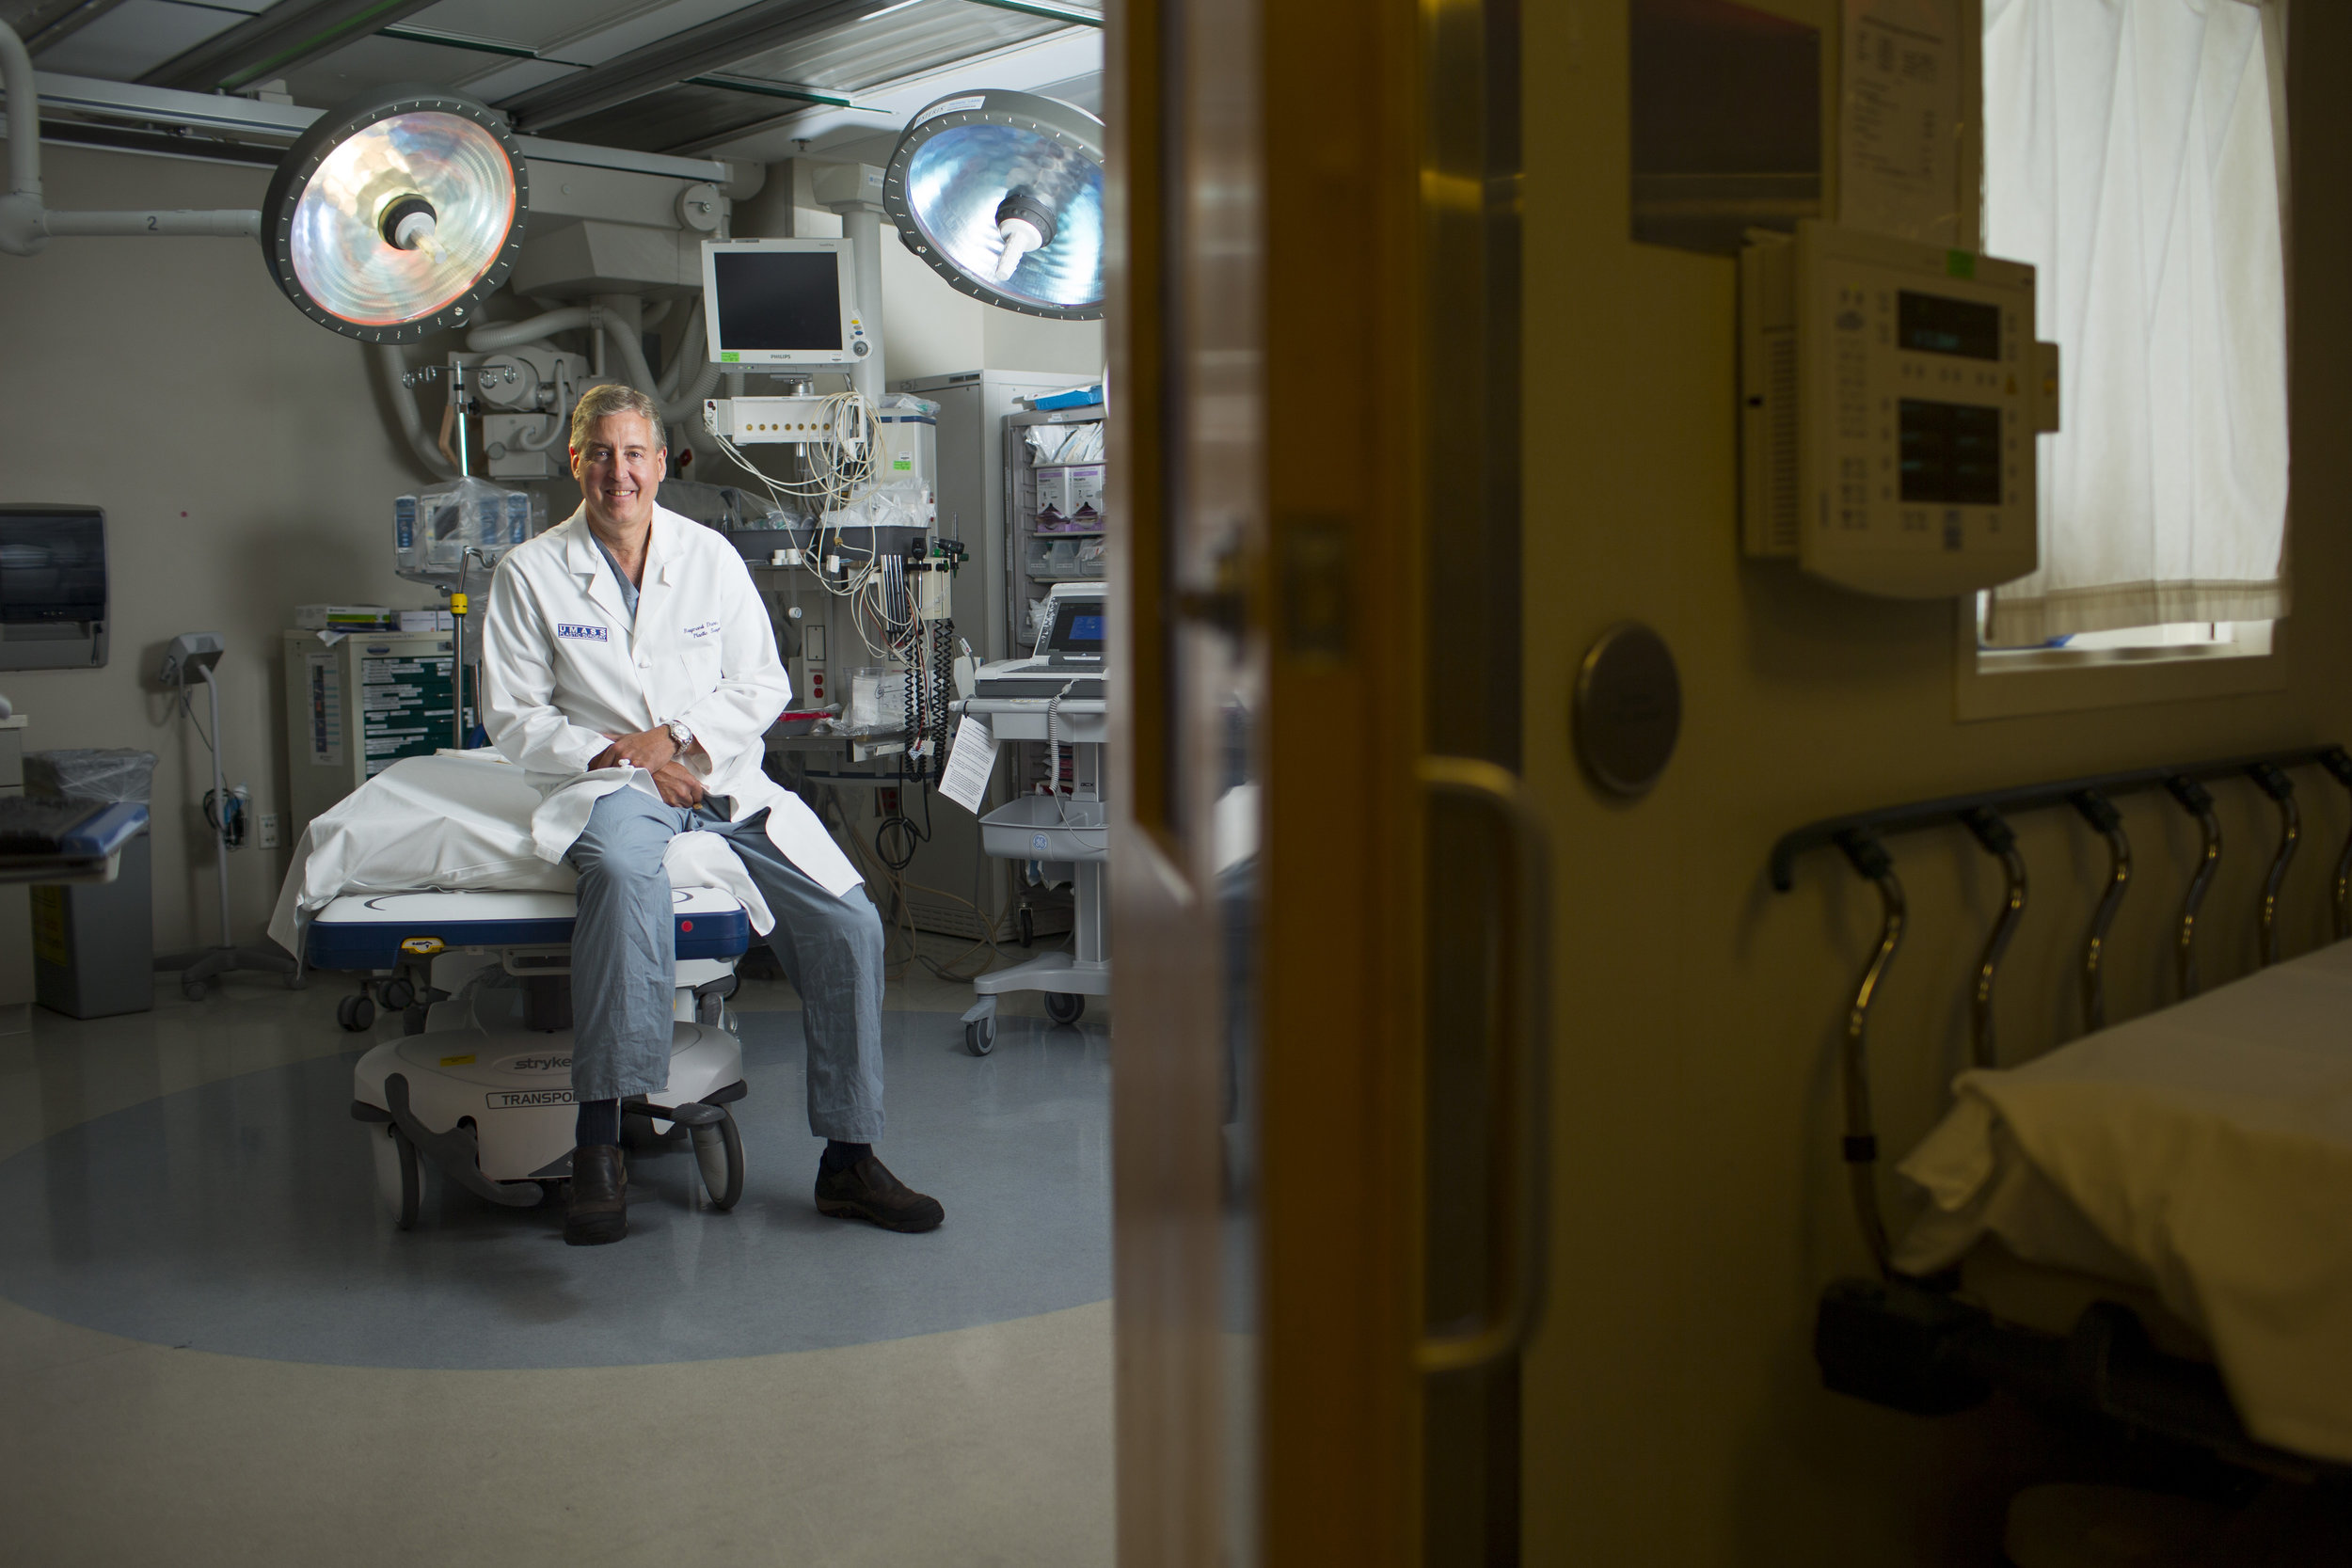  Raymond M. Dunn, MD, Professor and Chief, UMass Memorial Plastic Surgery, is photographed in one of the trauma unit bays at UMass Memorial Hospital in Worcester, Massachusetts on July 28, 2017. 